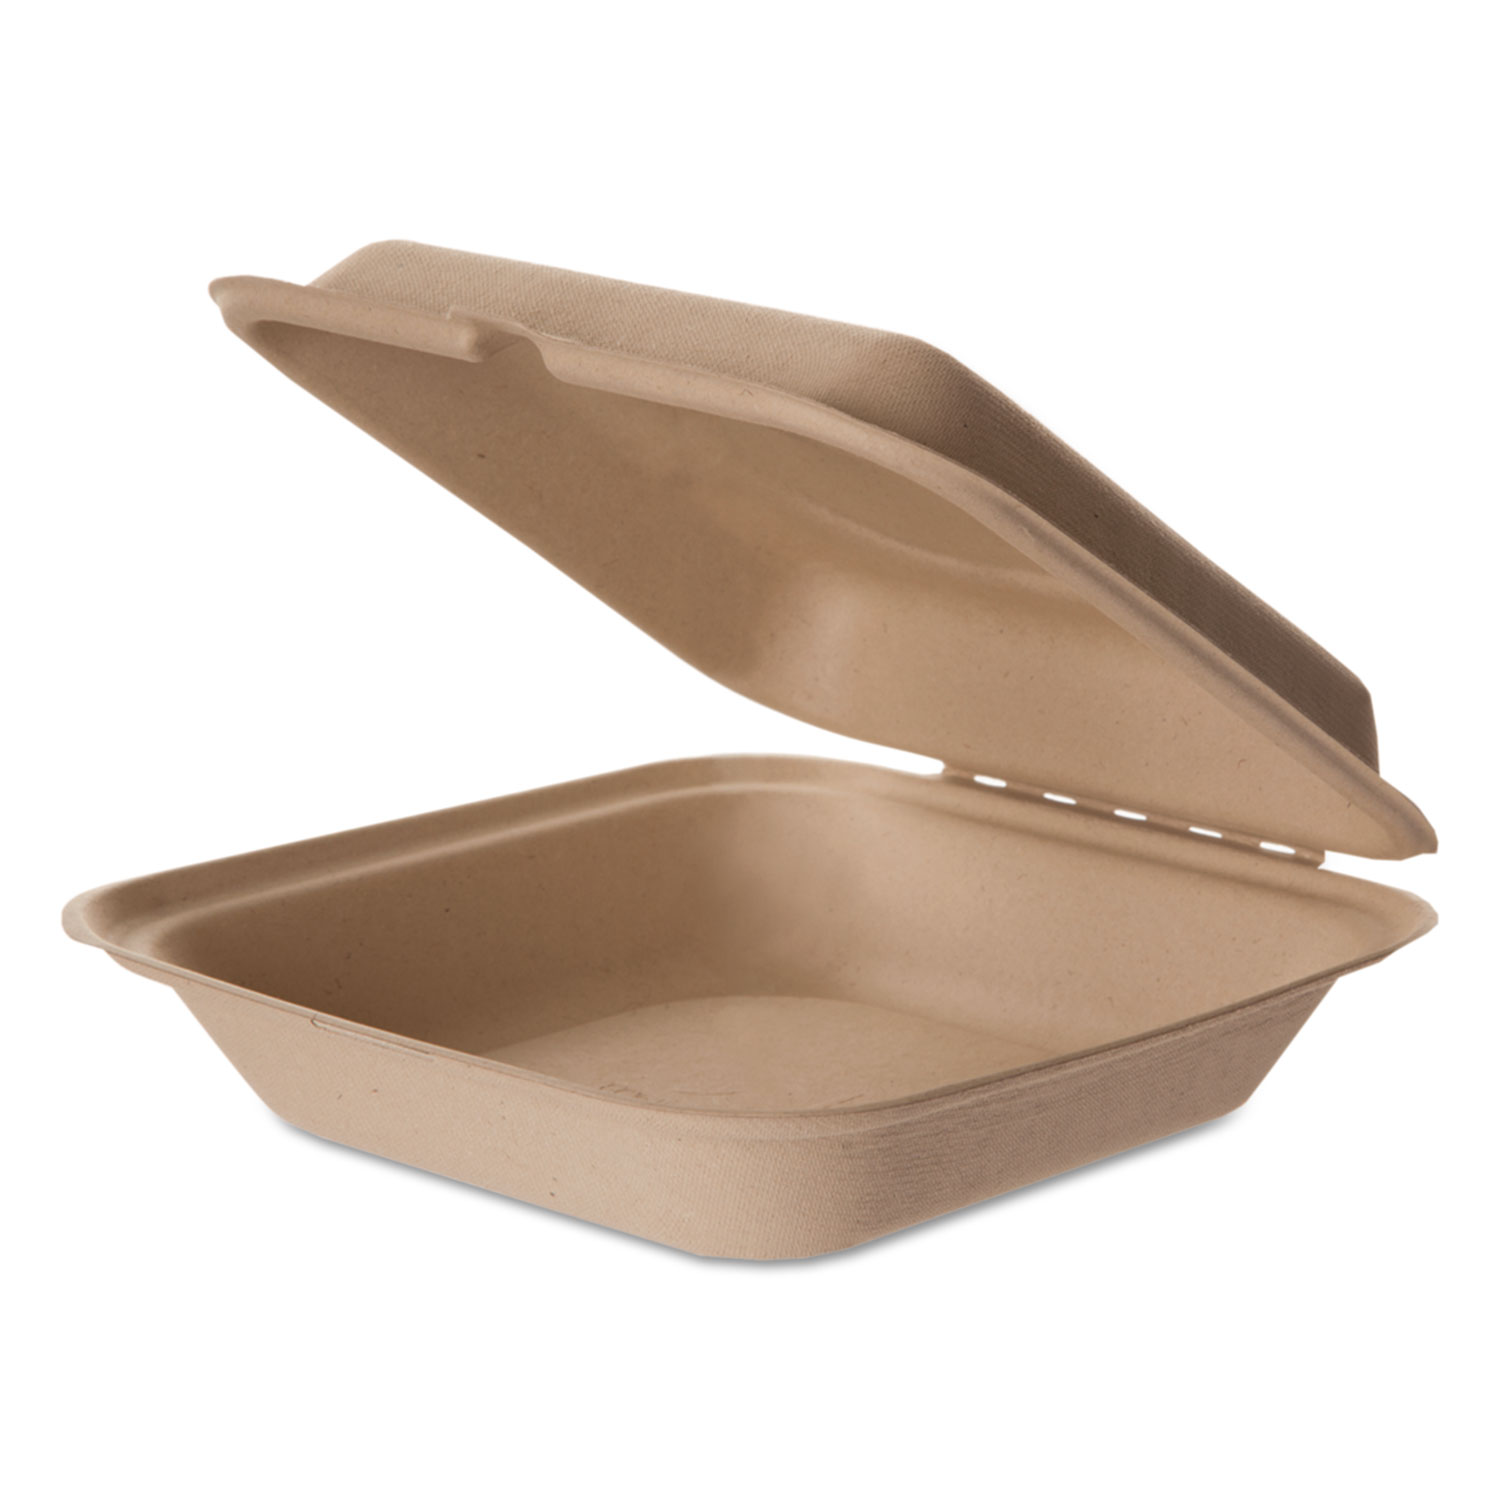  Eco-Products EP-HCW81 Wheat Straw Hinged Clamshell Containers, 8 x 8 x 3, 200/Carton (ECOEPHCW8) 